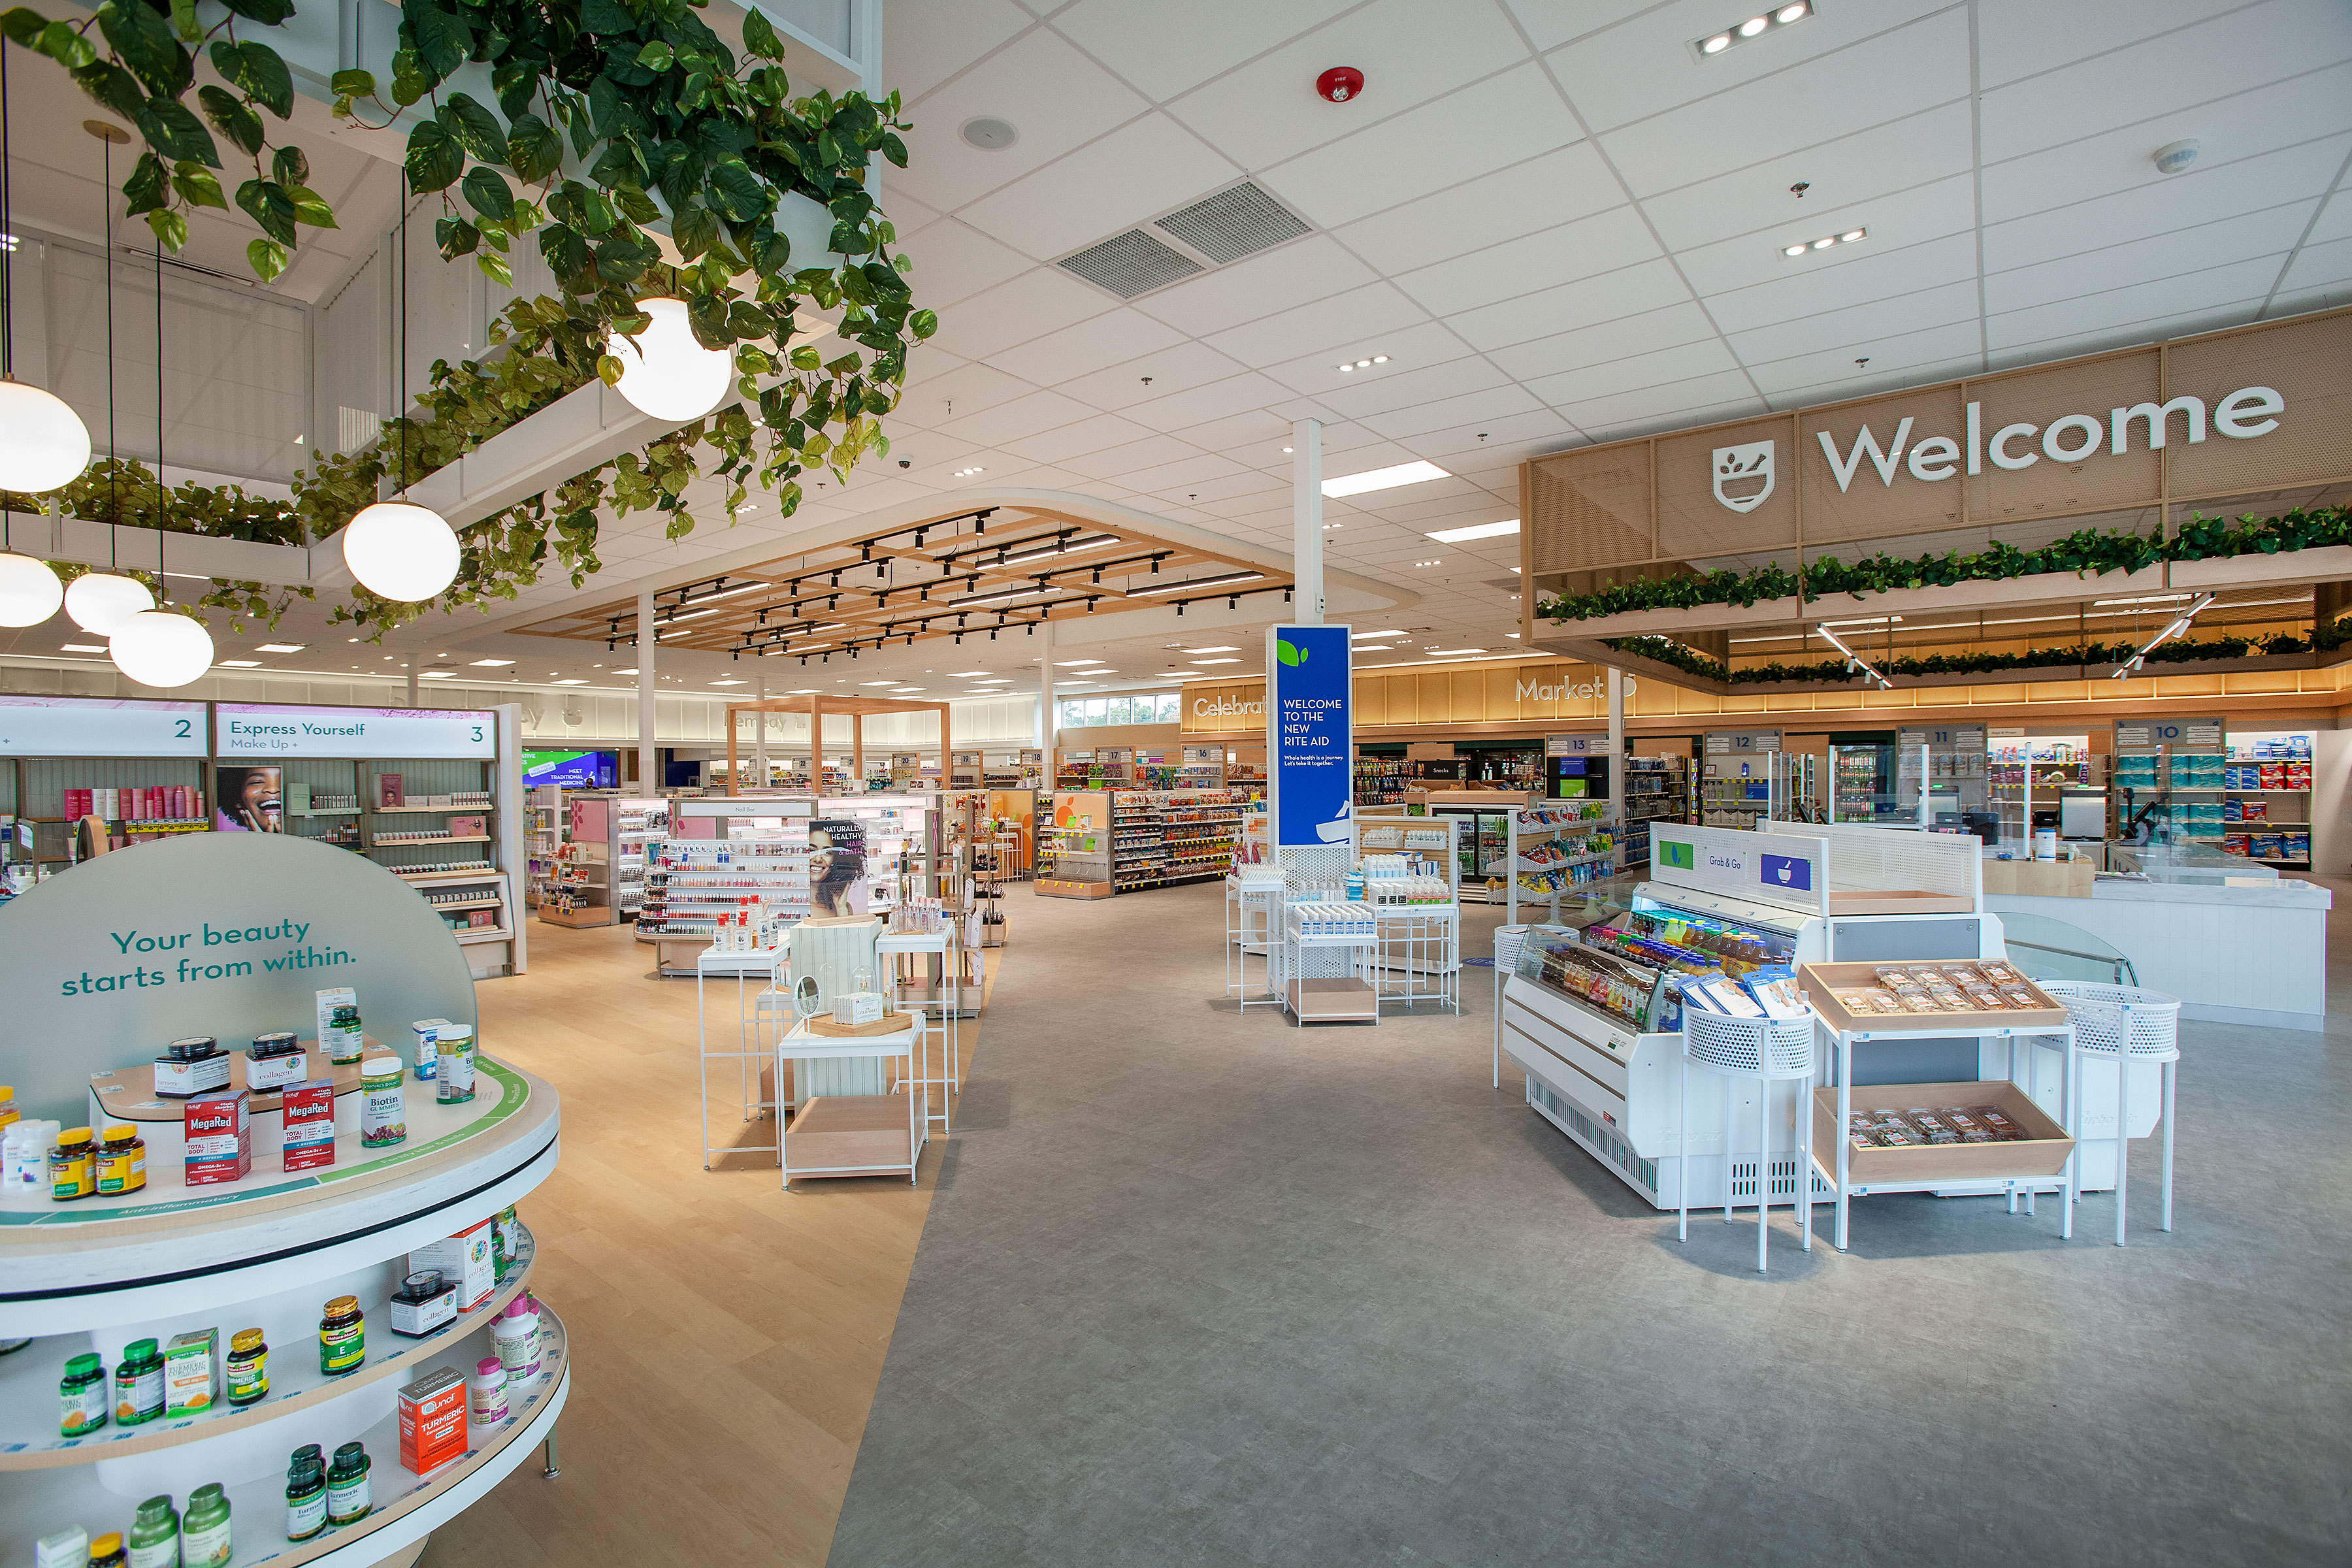 Rite Aid Unveils Vision for the Future of Retail Pharmacy